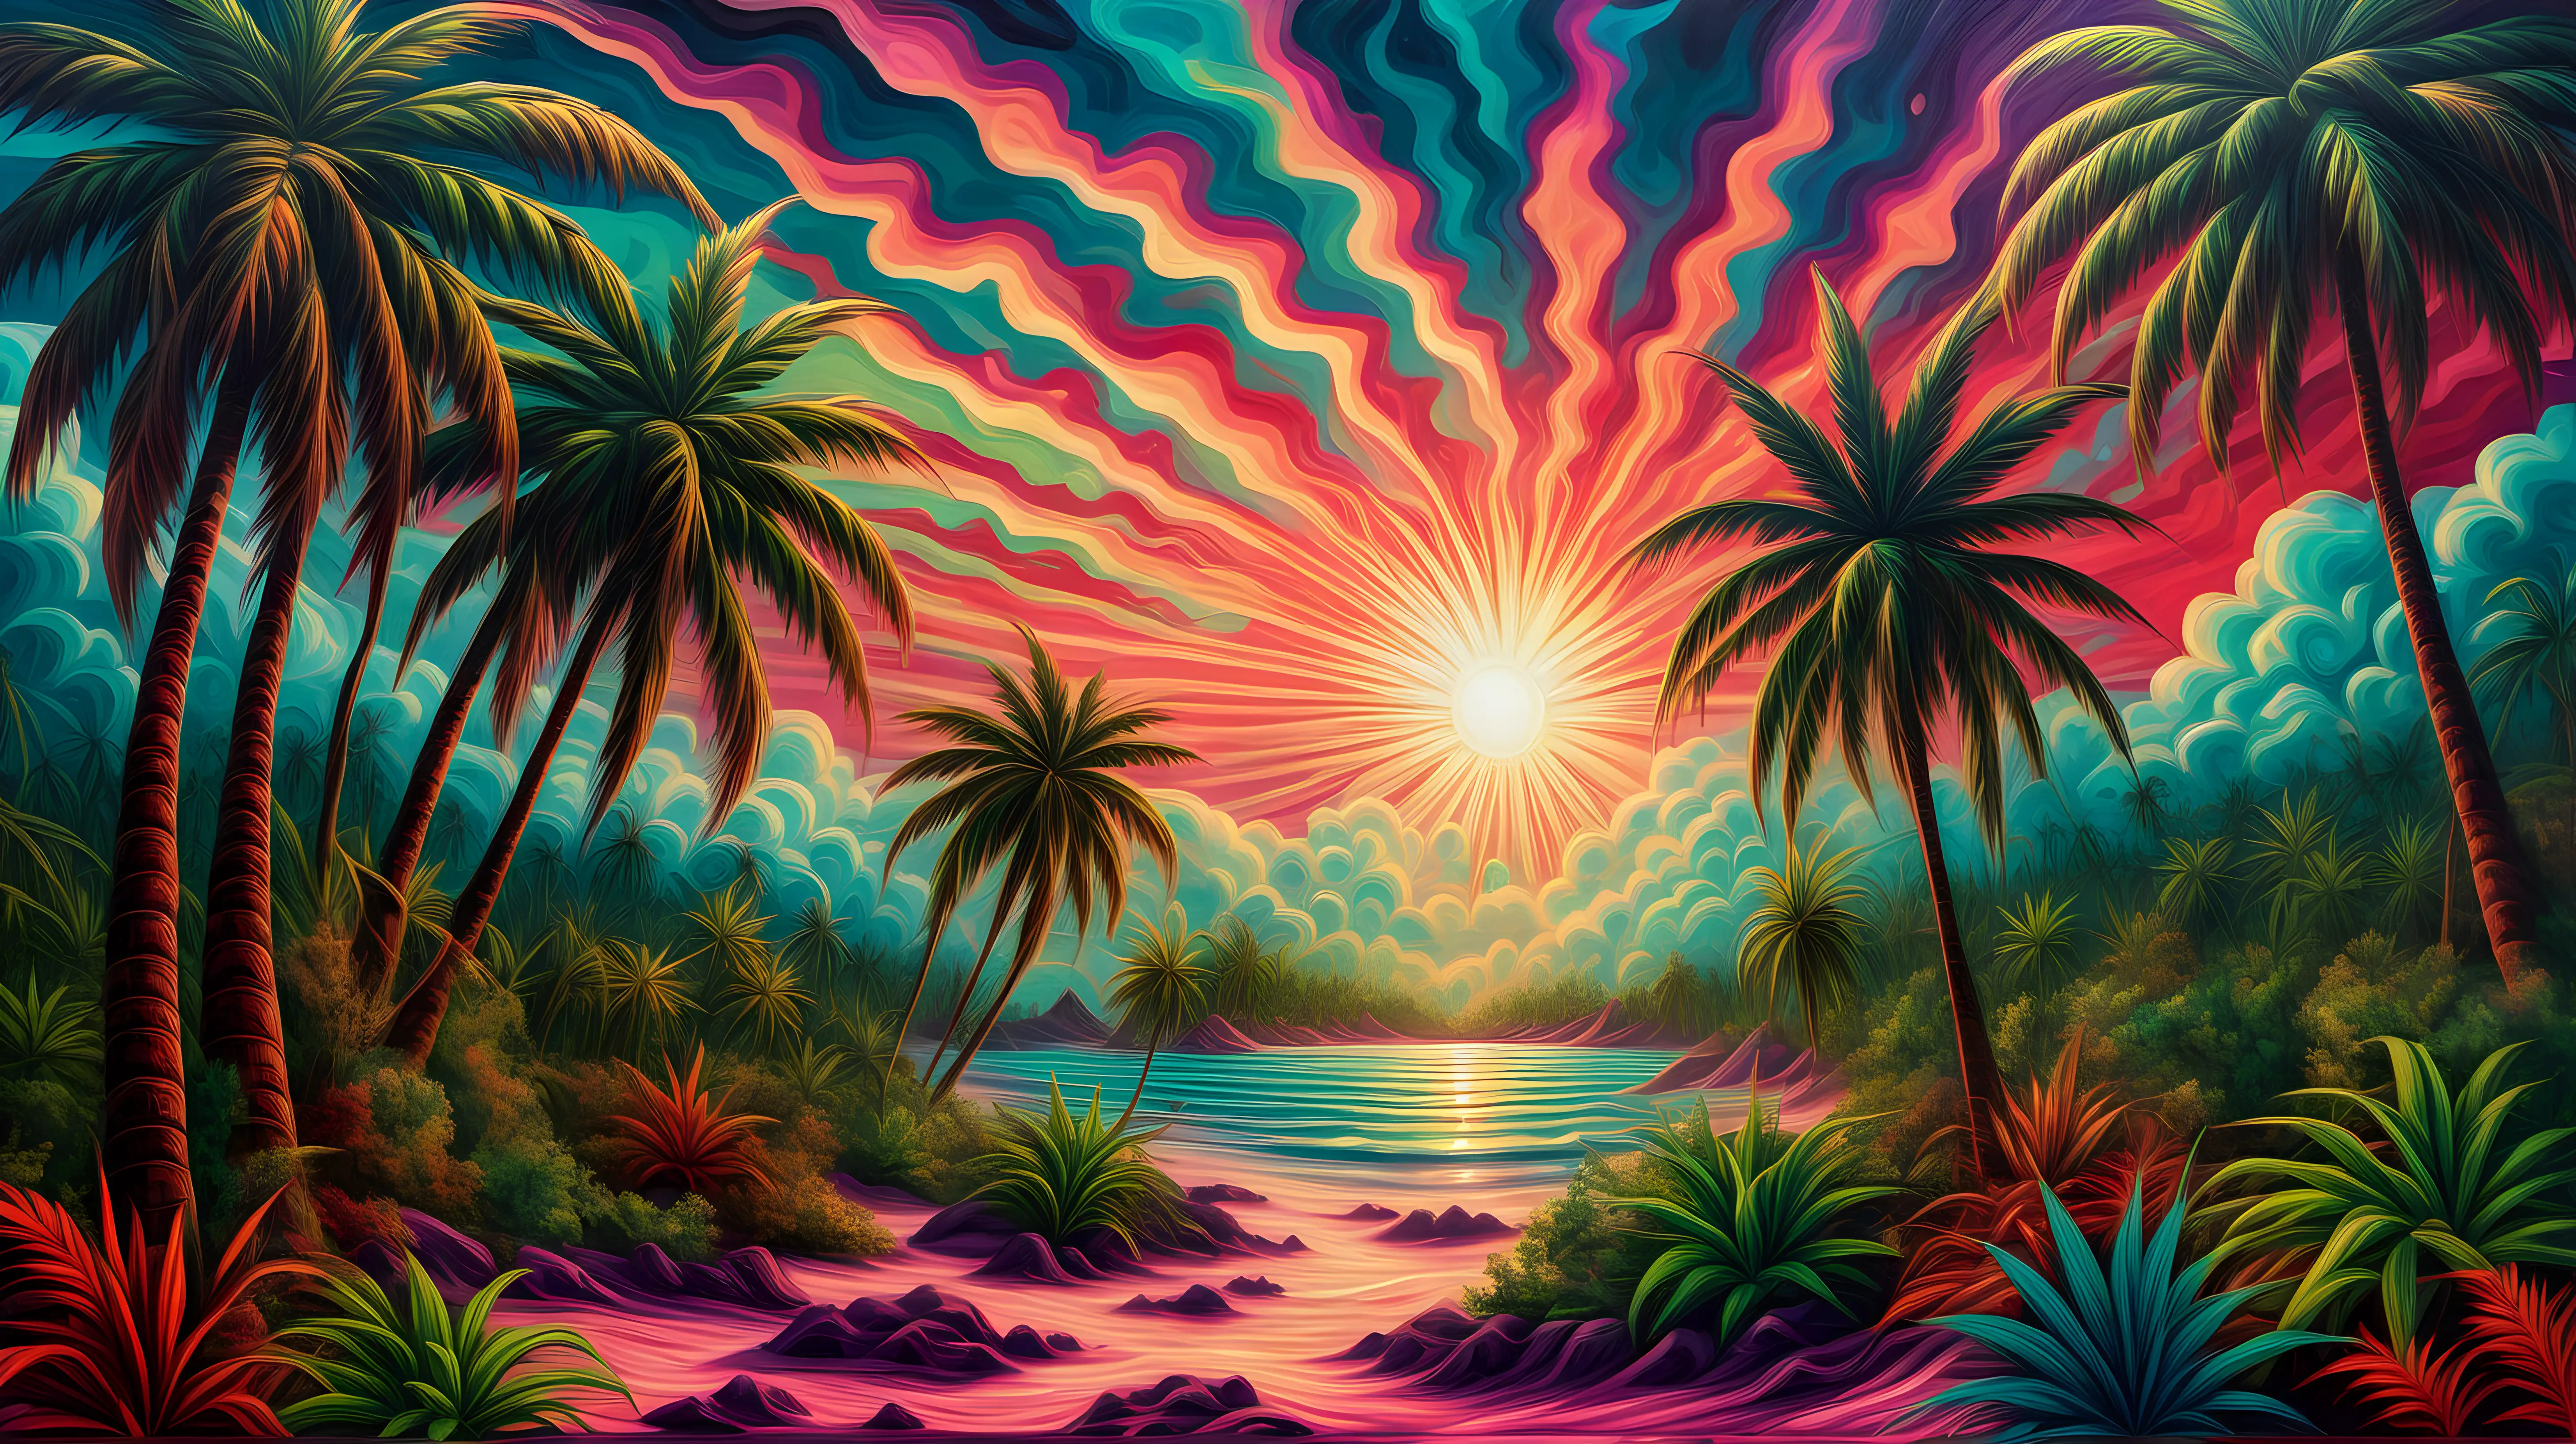 Psychedelic Tropical Landscape Oil Painting with Cannabisinspired Palms